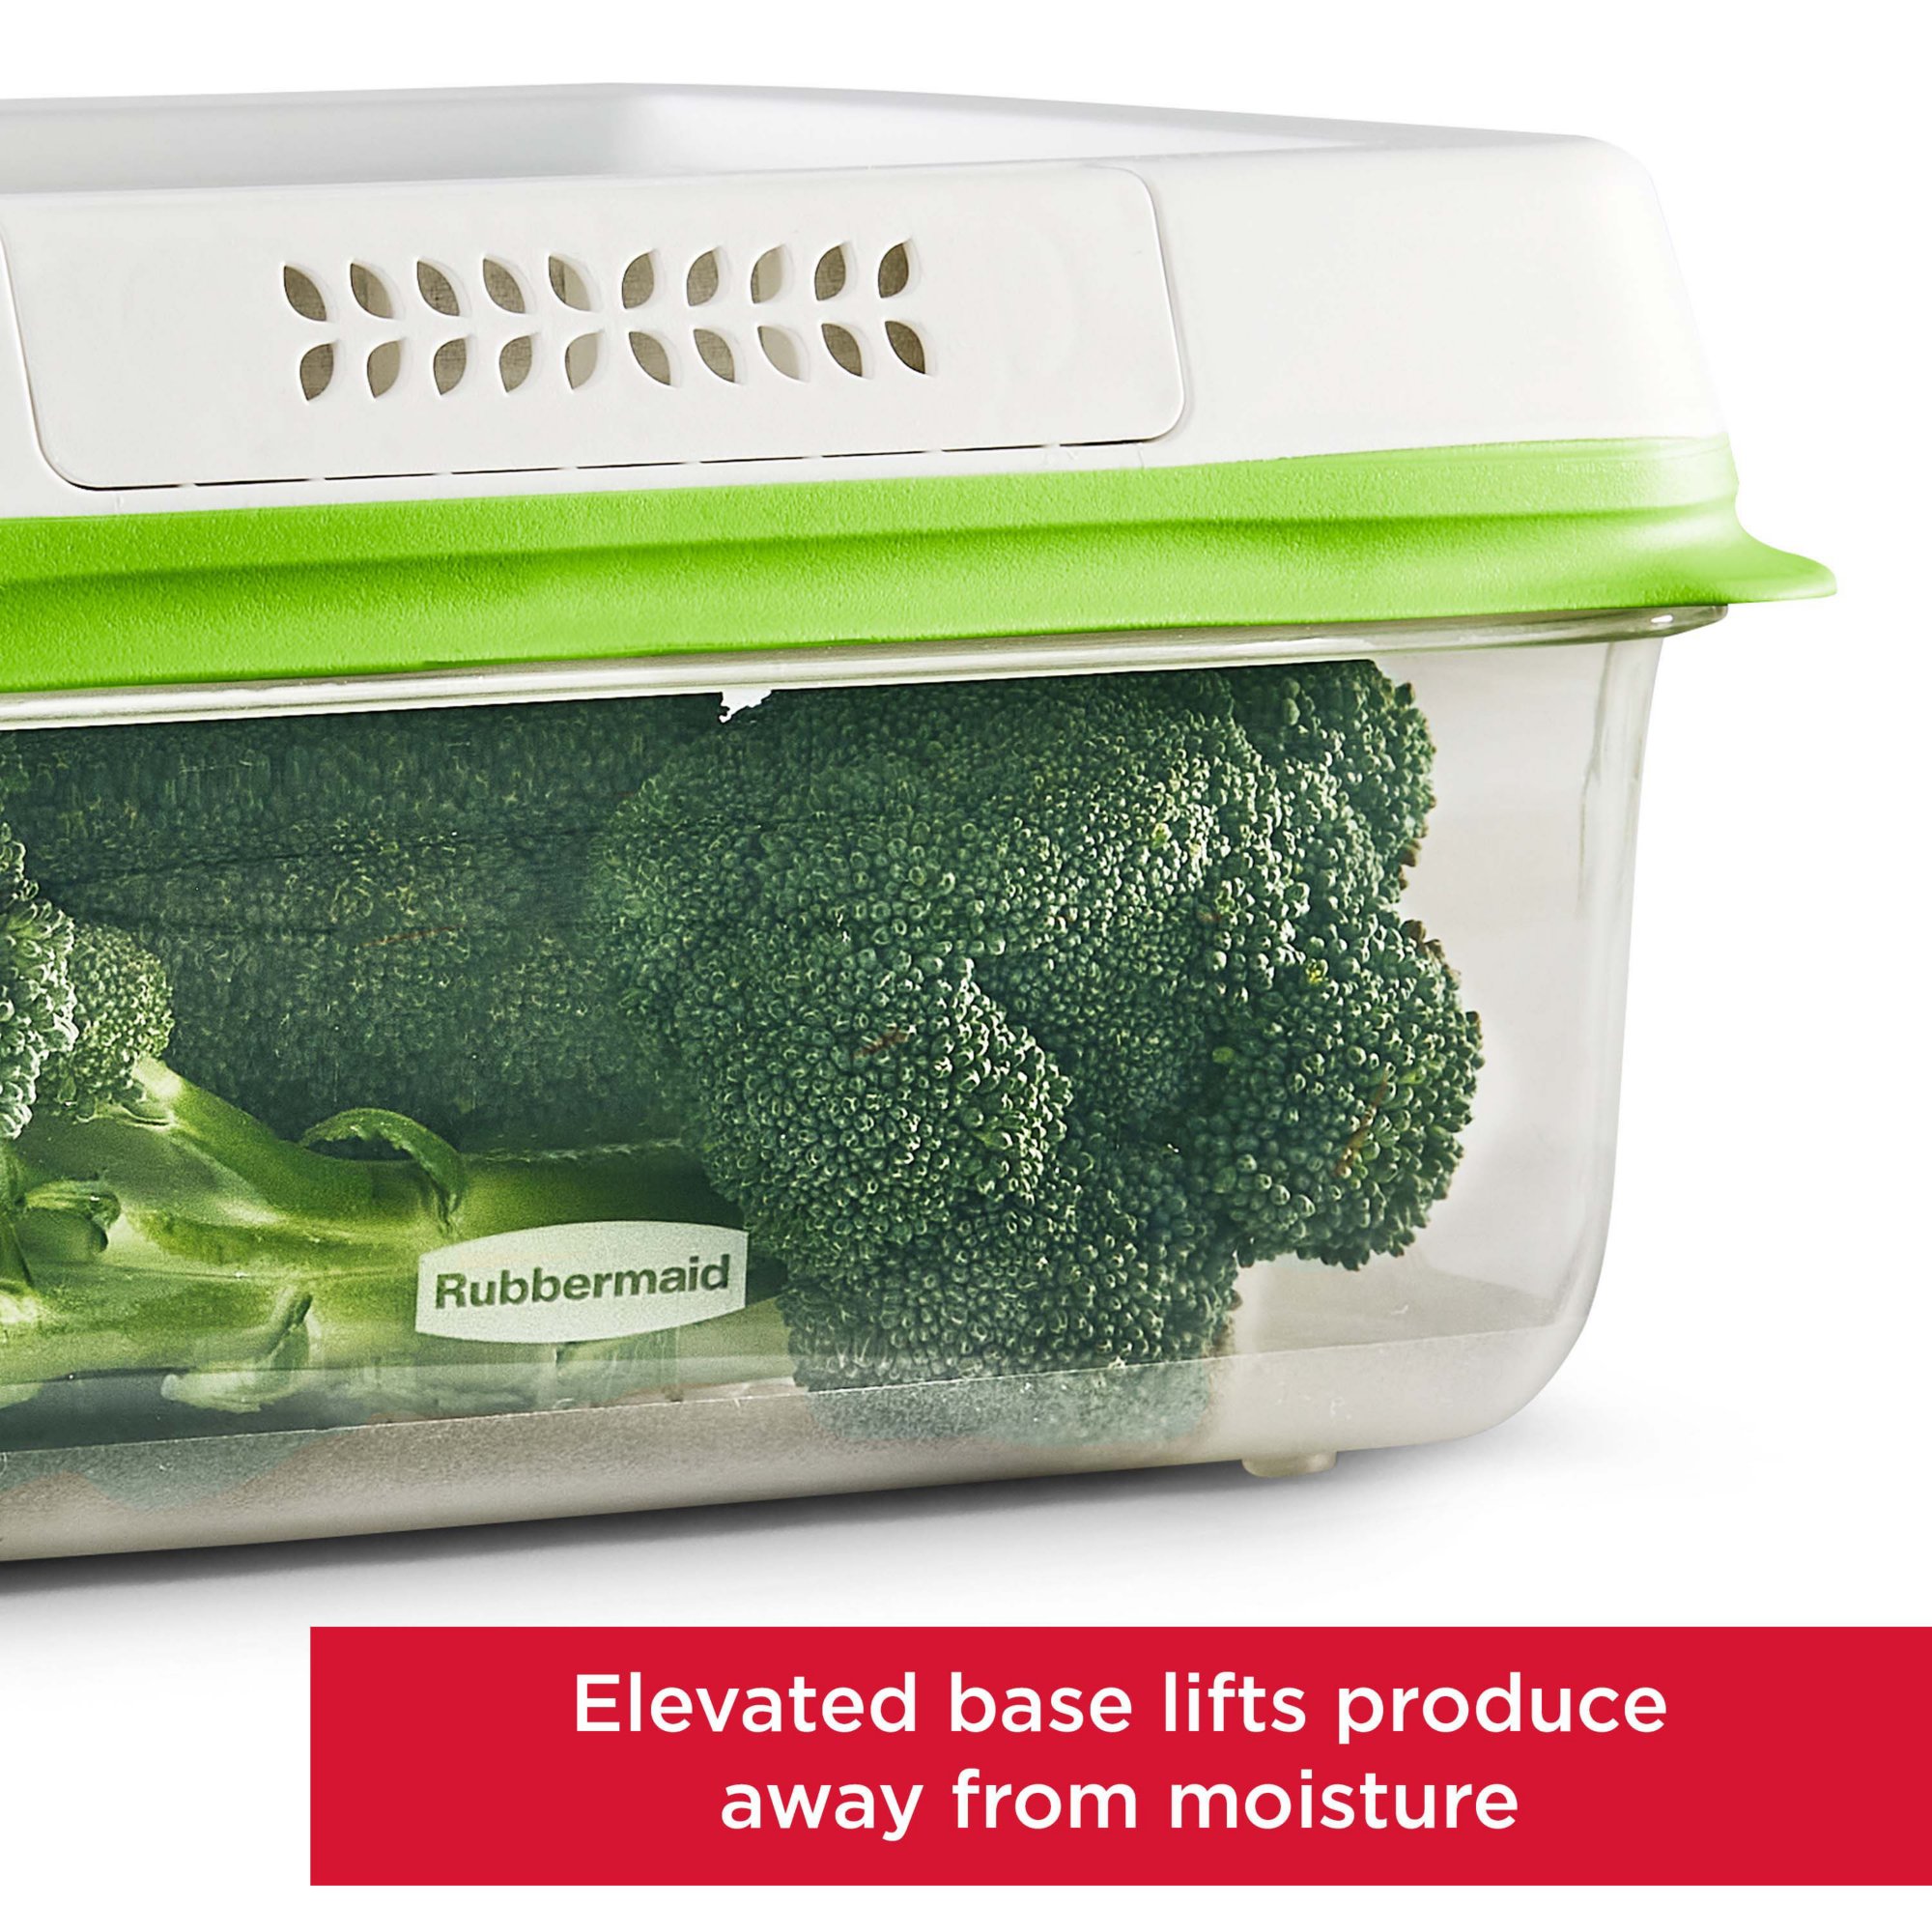 Food and Storage Needs With Rubbermaid® - Graceful Order